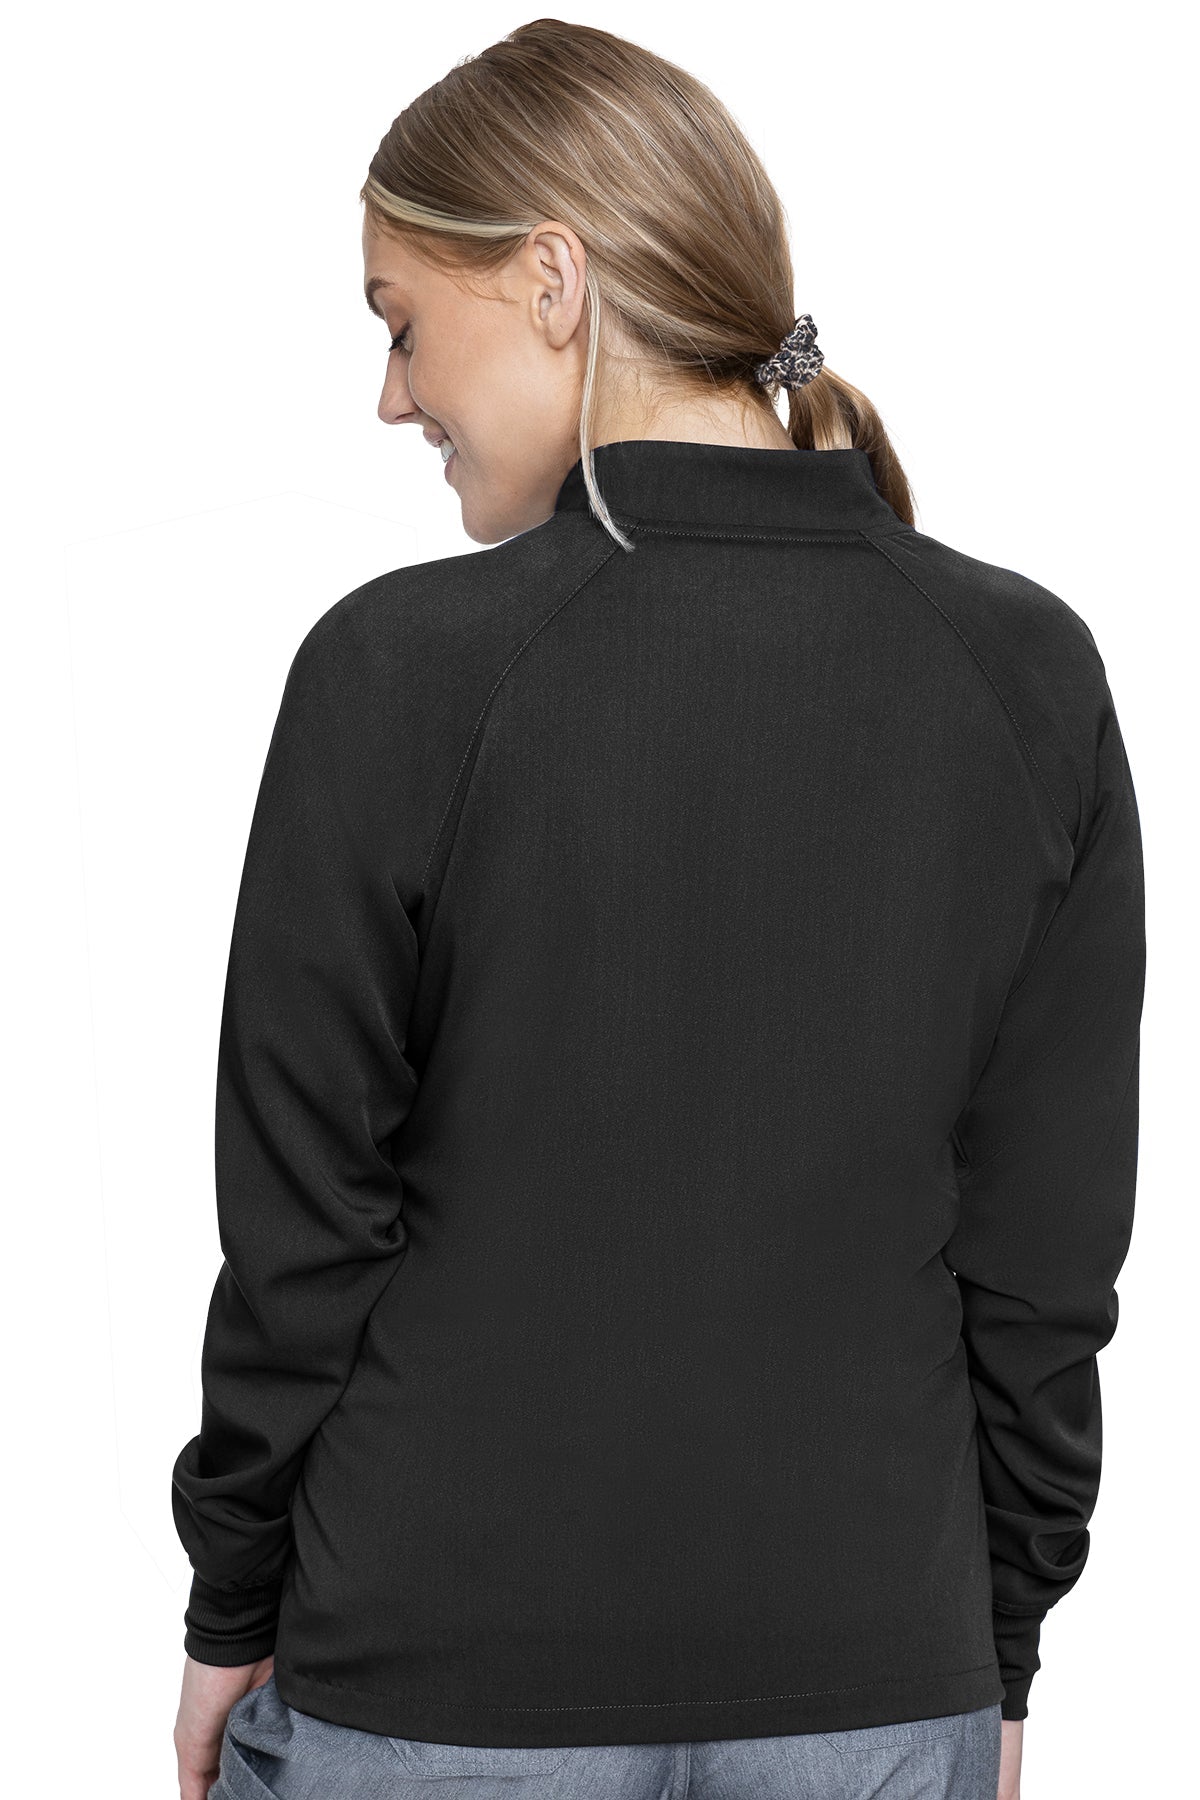 MED COUTURE 7660 TOUCH RAGLAN WARMUP